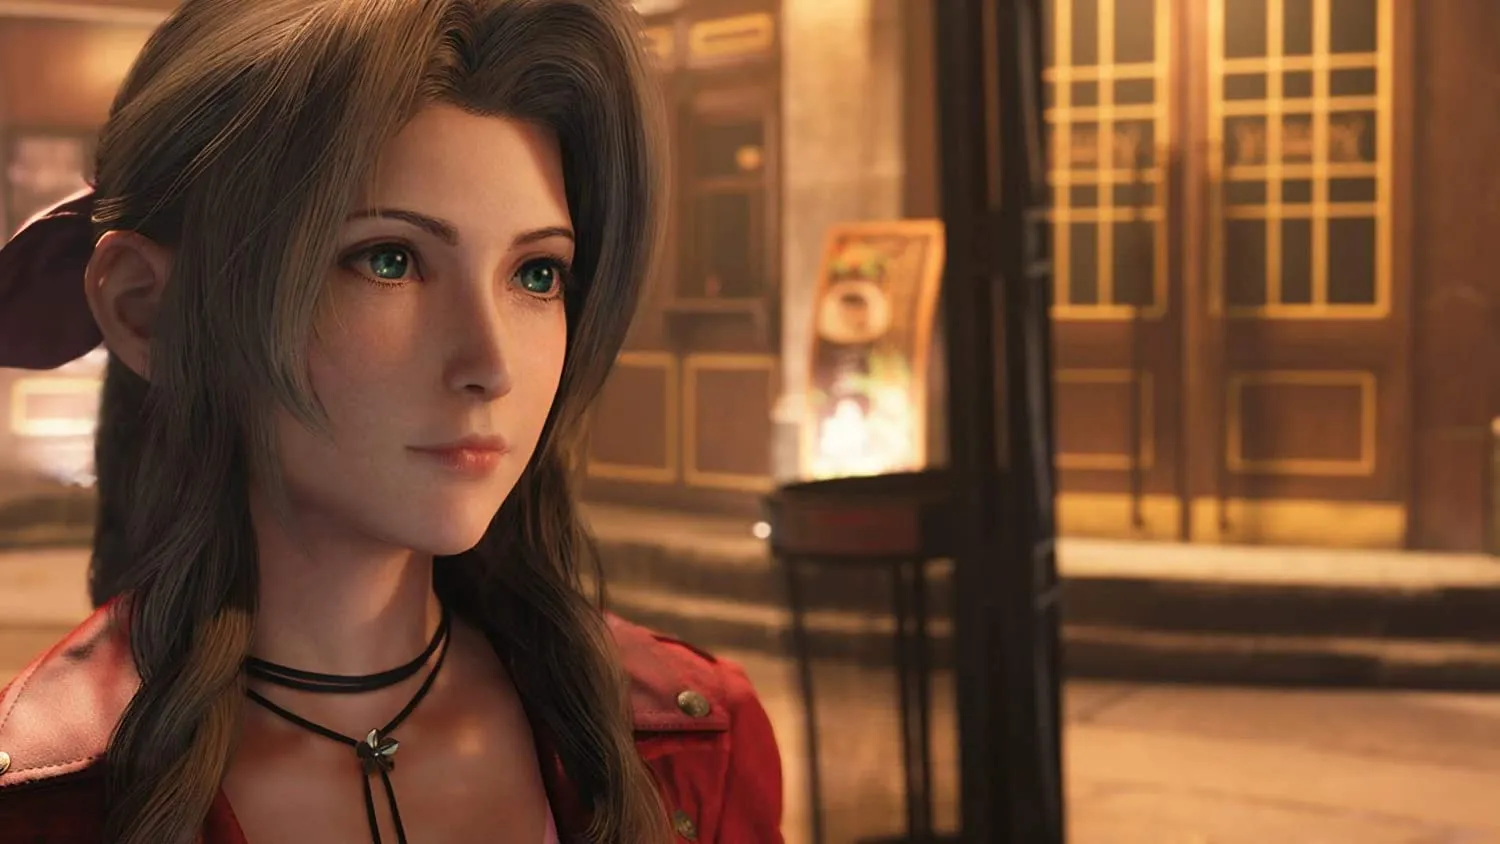 Confirmed No Denuvo for FFVII Remake PC! Potential mods coming